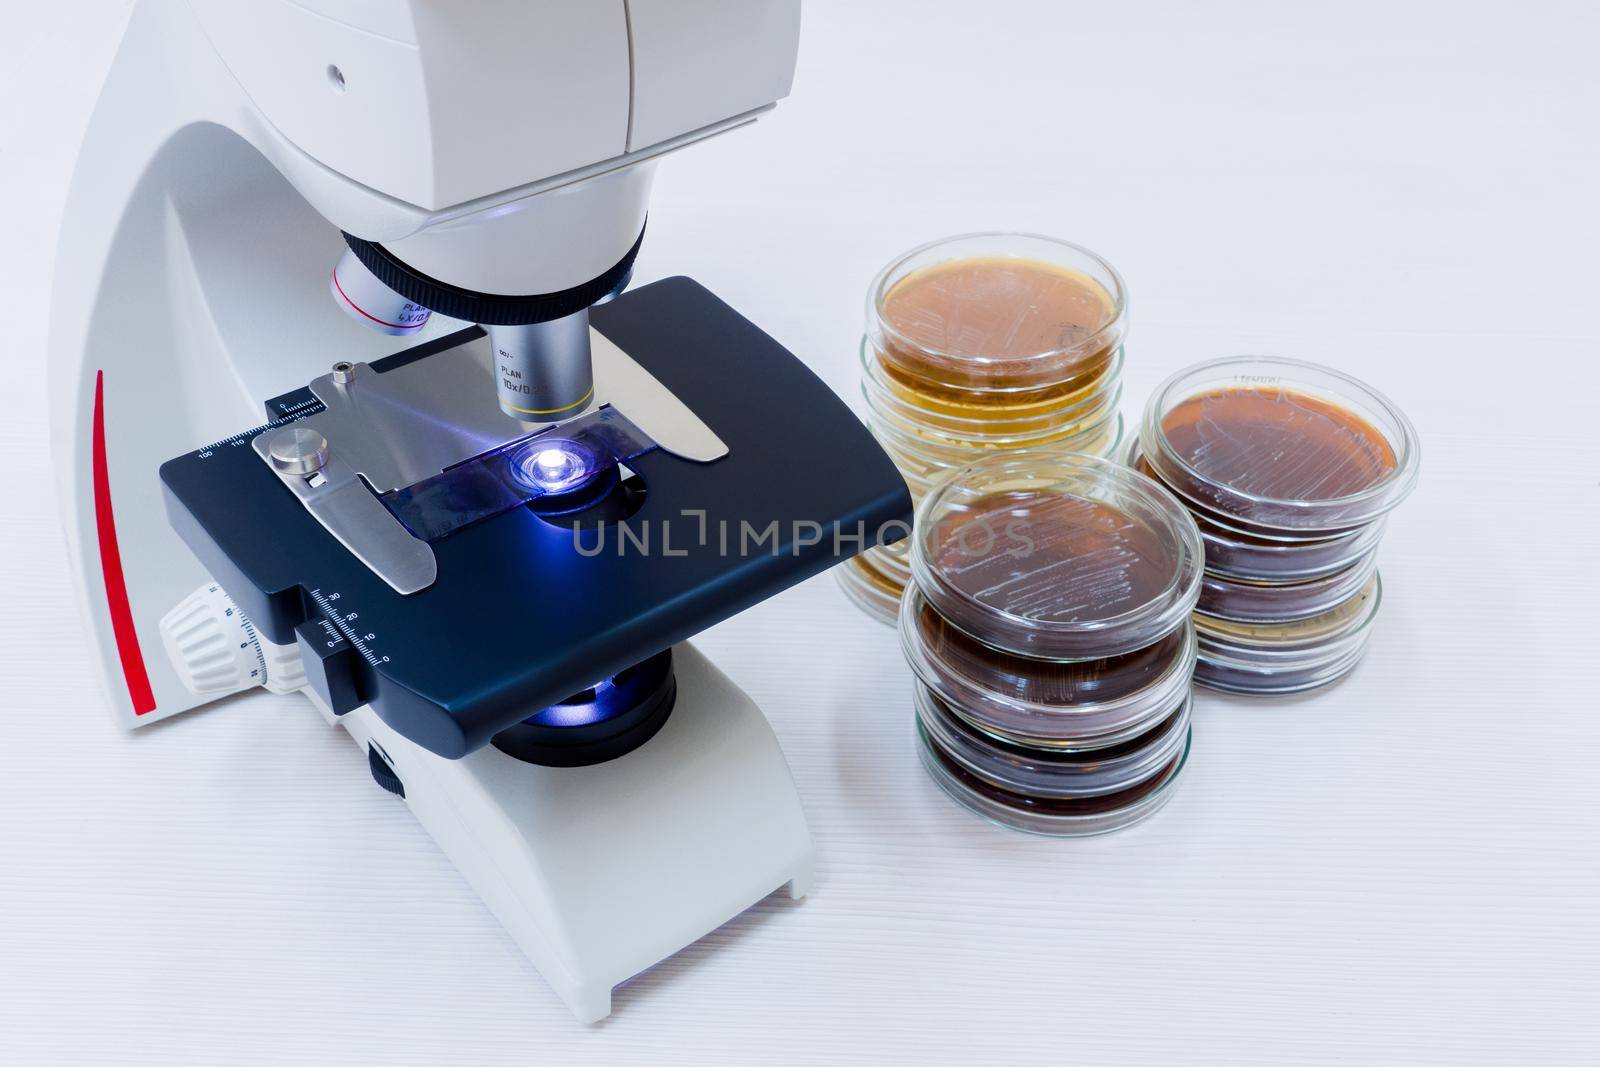 A microscope and petri dishes are near. A microscope on the desktop and next to it lie petri dishes.